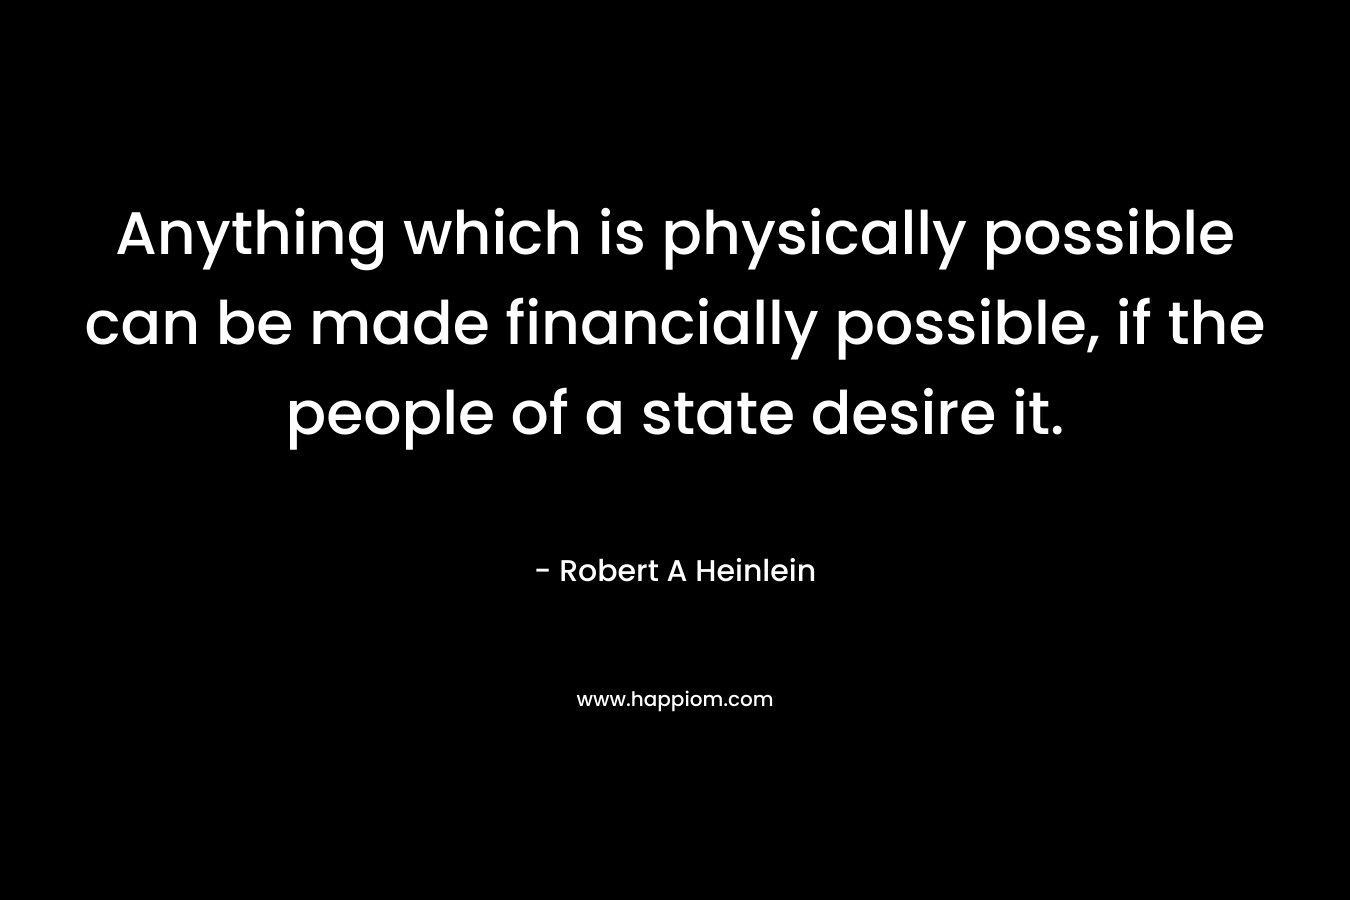 Anything which is physically possible can be made financially possible, if the people of a state desire it.